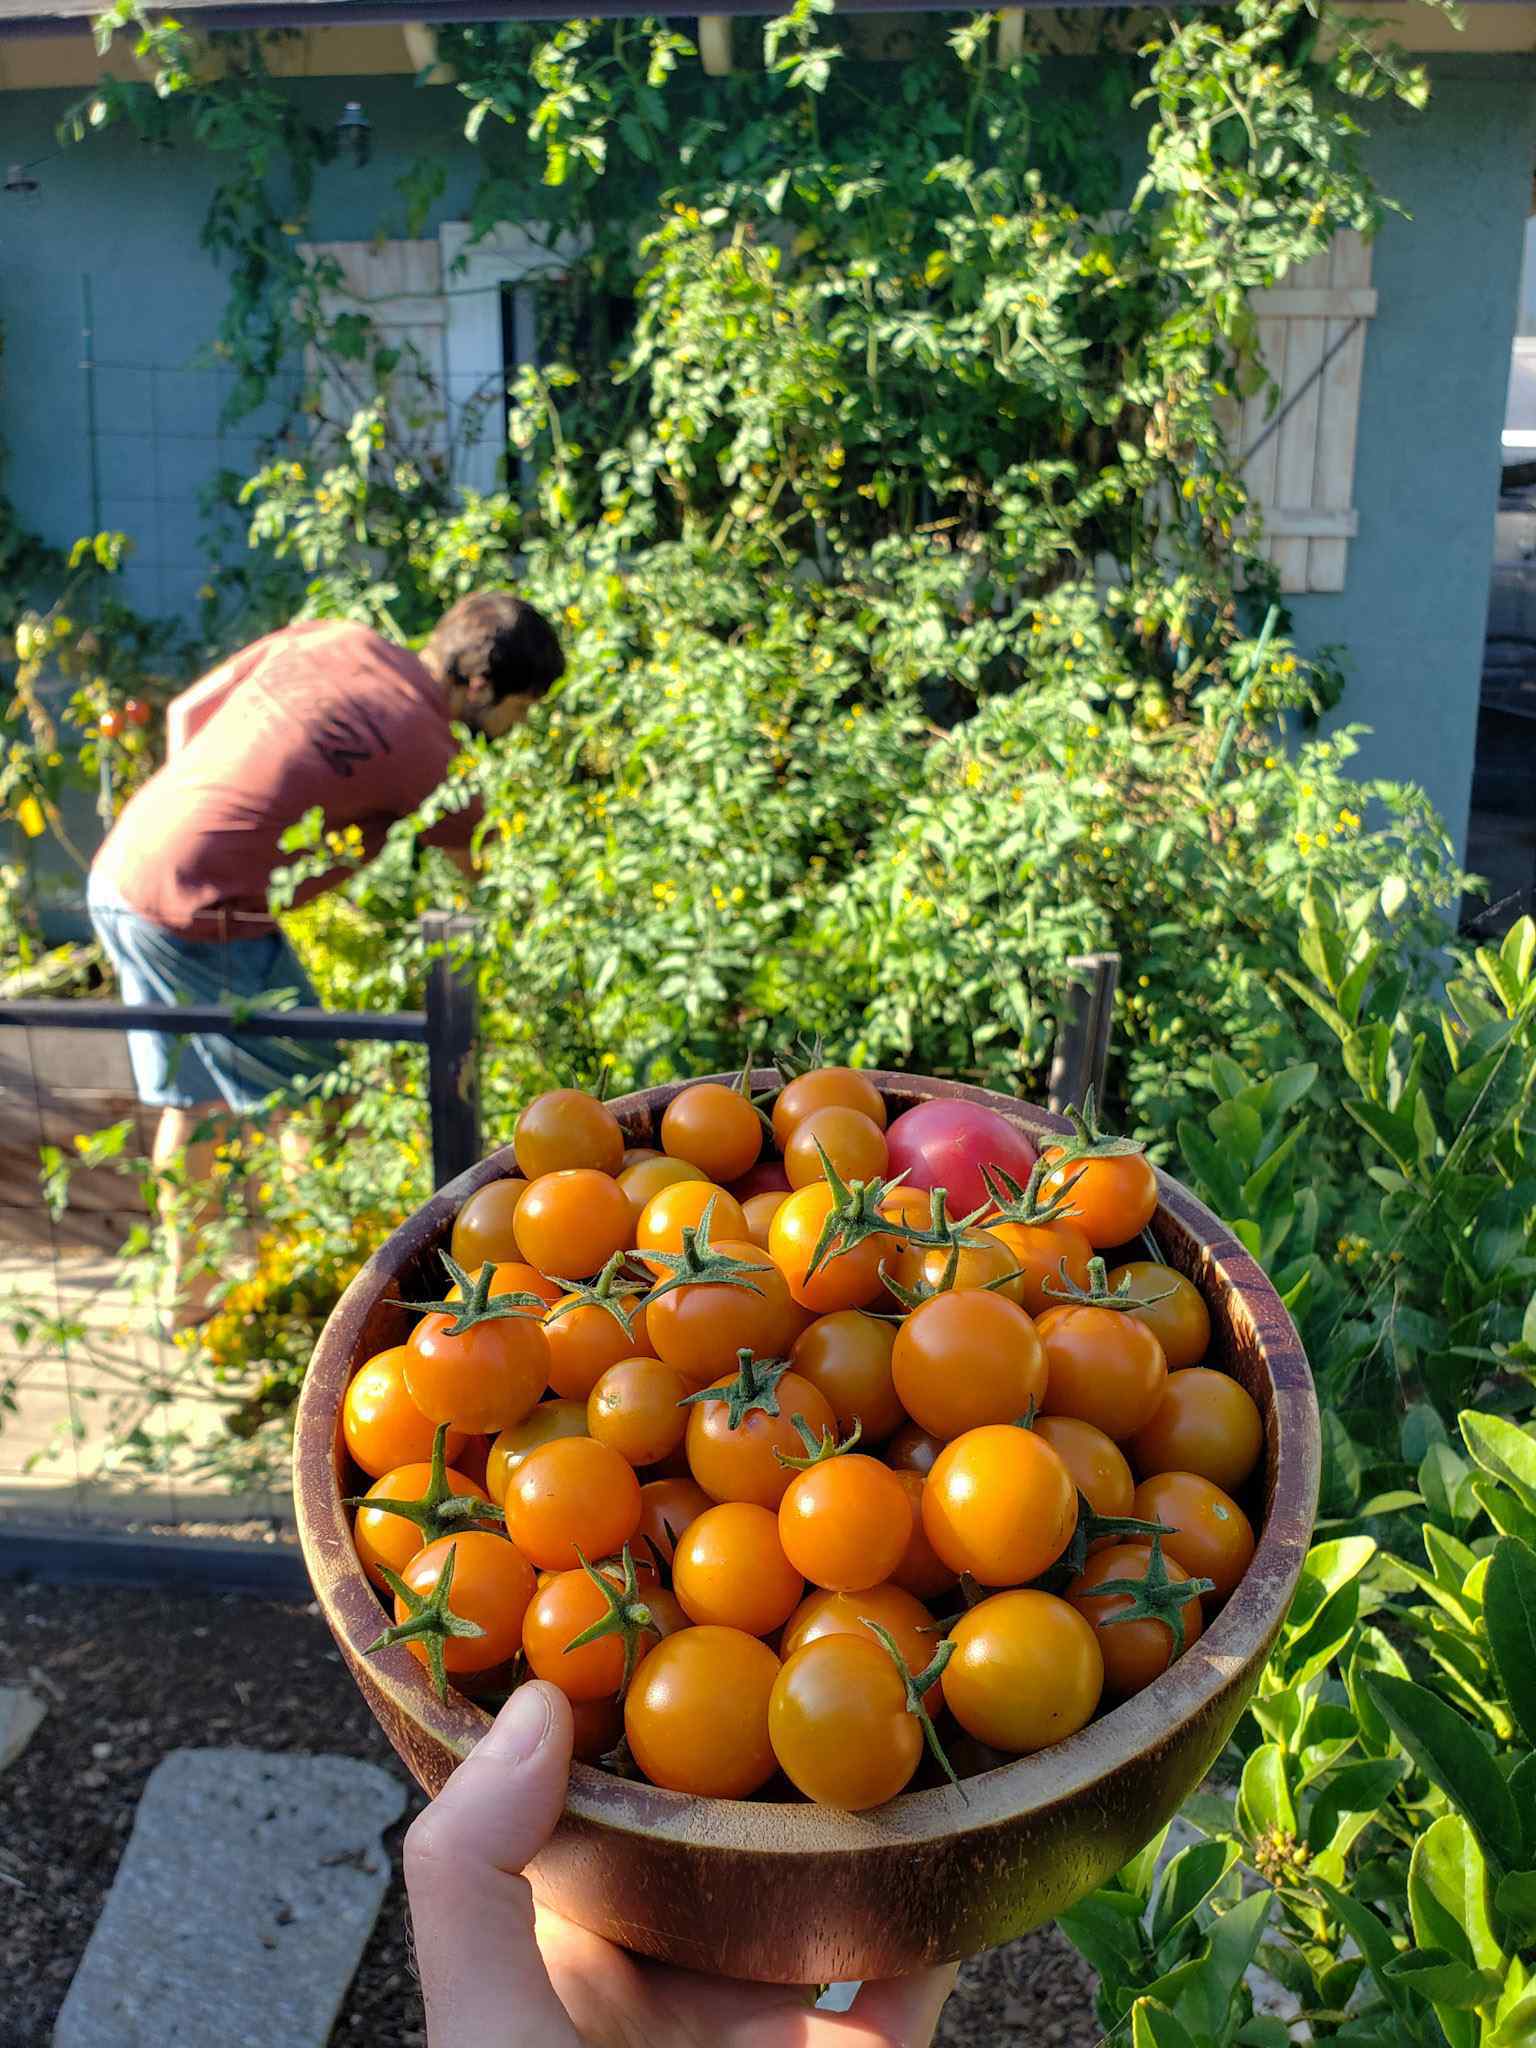 A hand is holding a wooden bowl of sungold cherry tomatoes that are bright orange in color. In the background, Aaron is shown inspecting the sungold tomato plant that bore the fruit that is featured. The plants is quite huge, looking like green blob of plant material. The plant is growing into the rafters of the house that it is growing next to. 